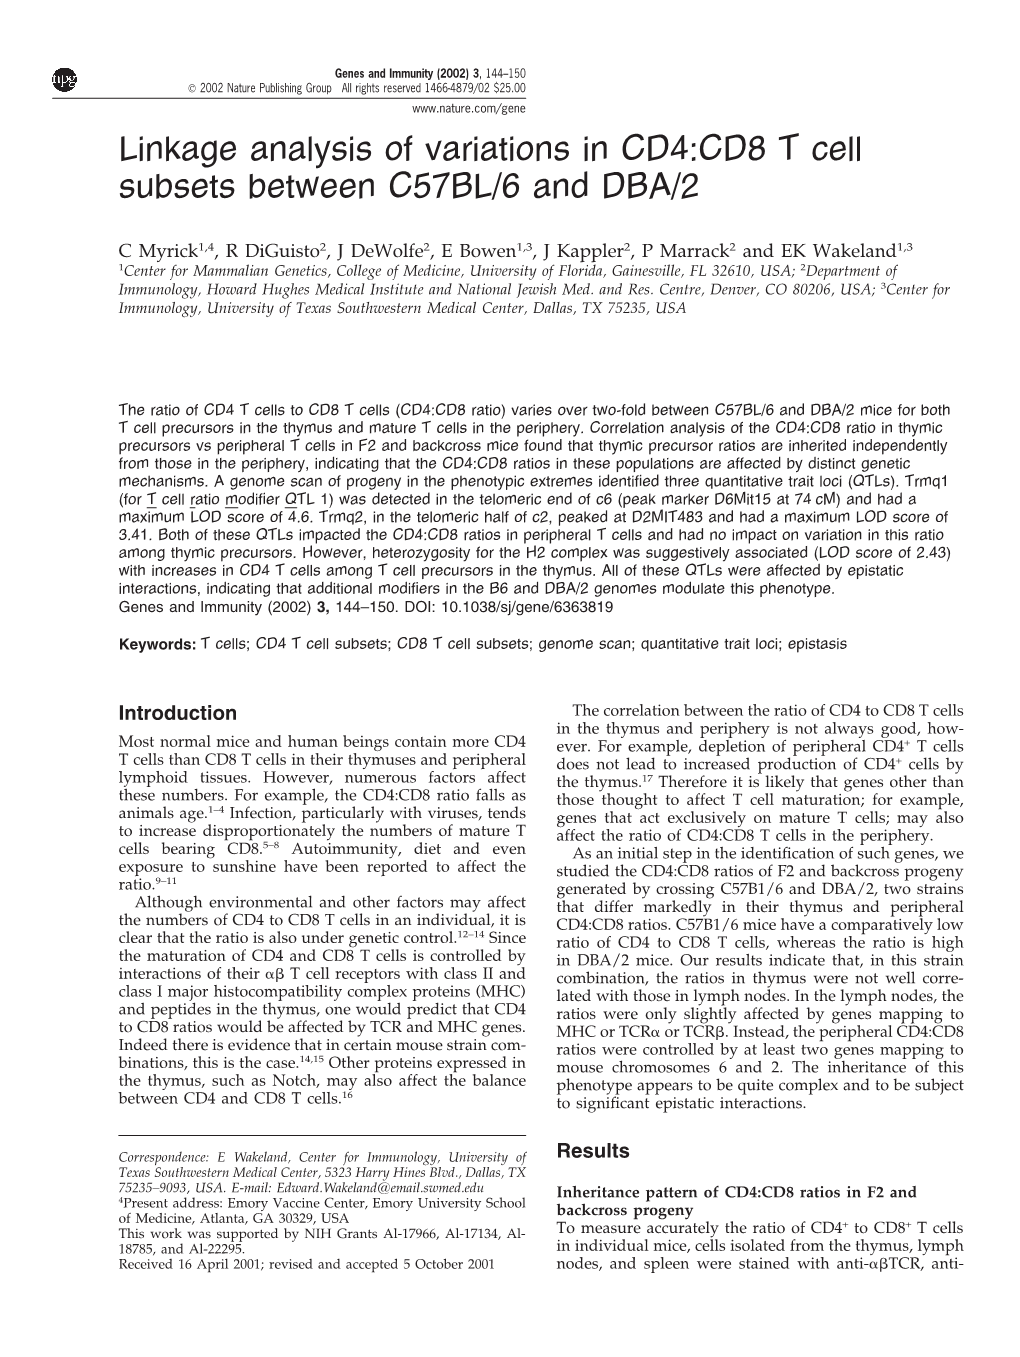 Linkage Analysis of Variations in CD4:CD8 T Cell Subsets Between C57BL/6 and DBA/2